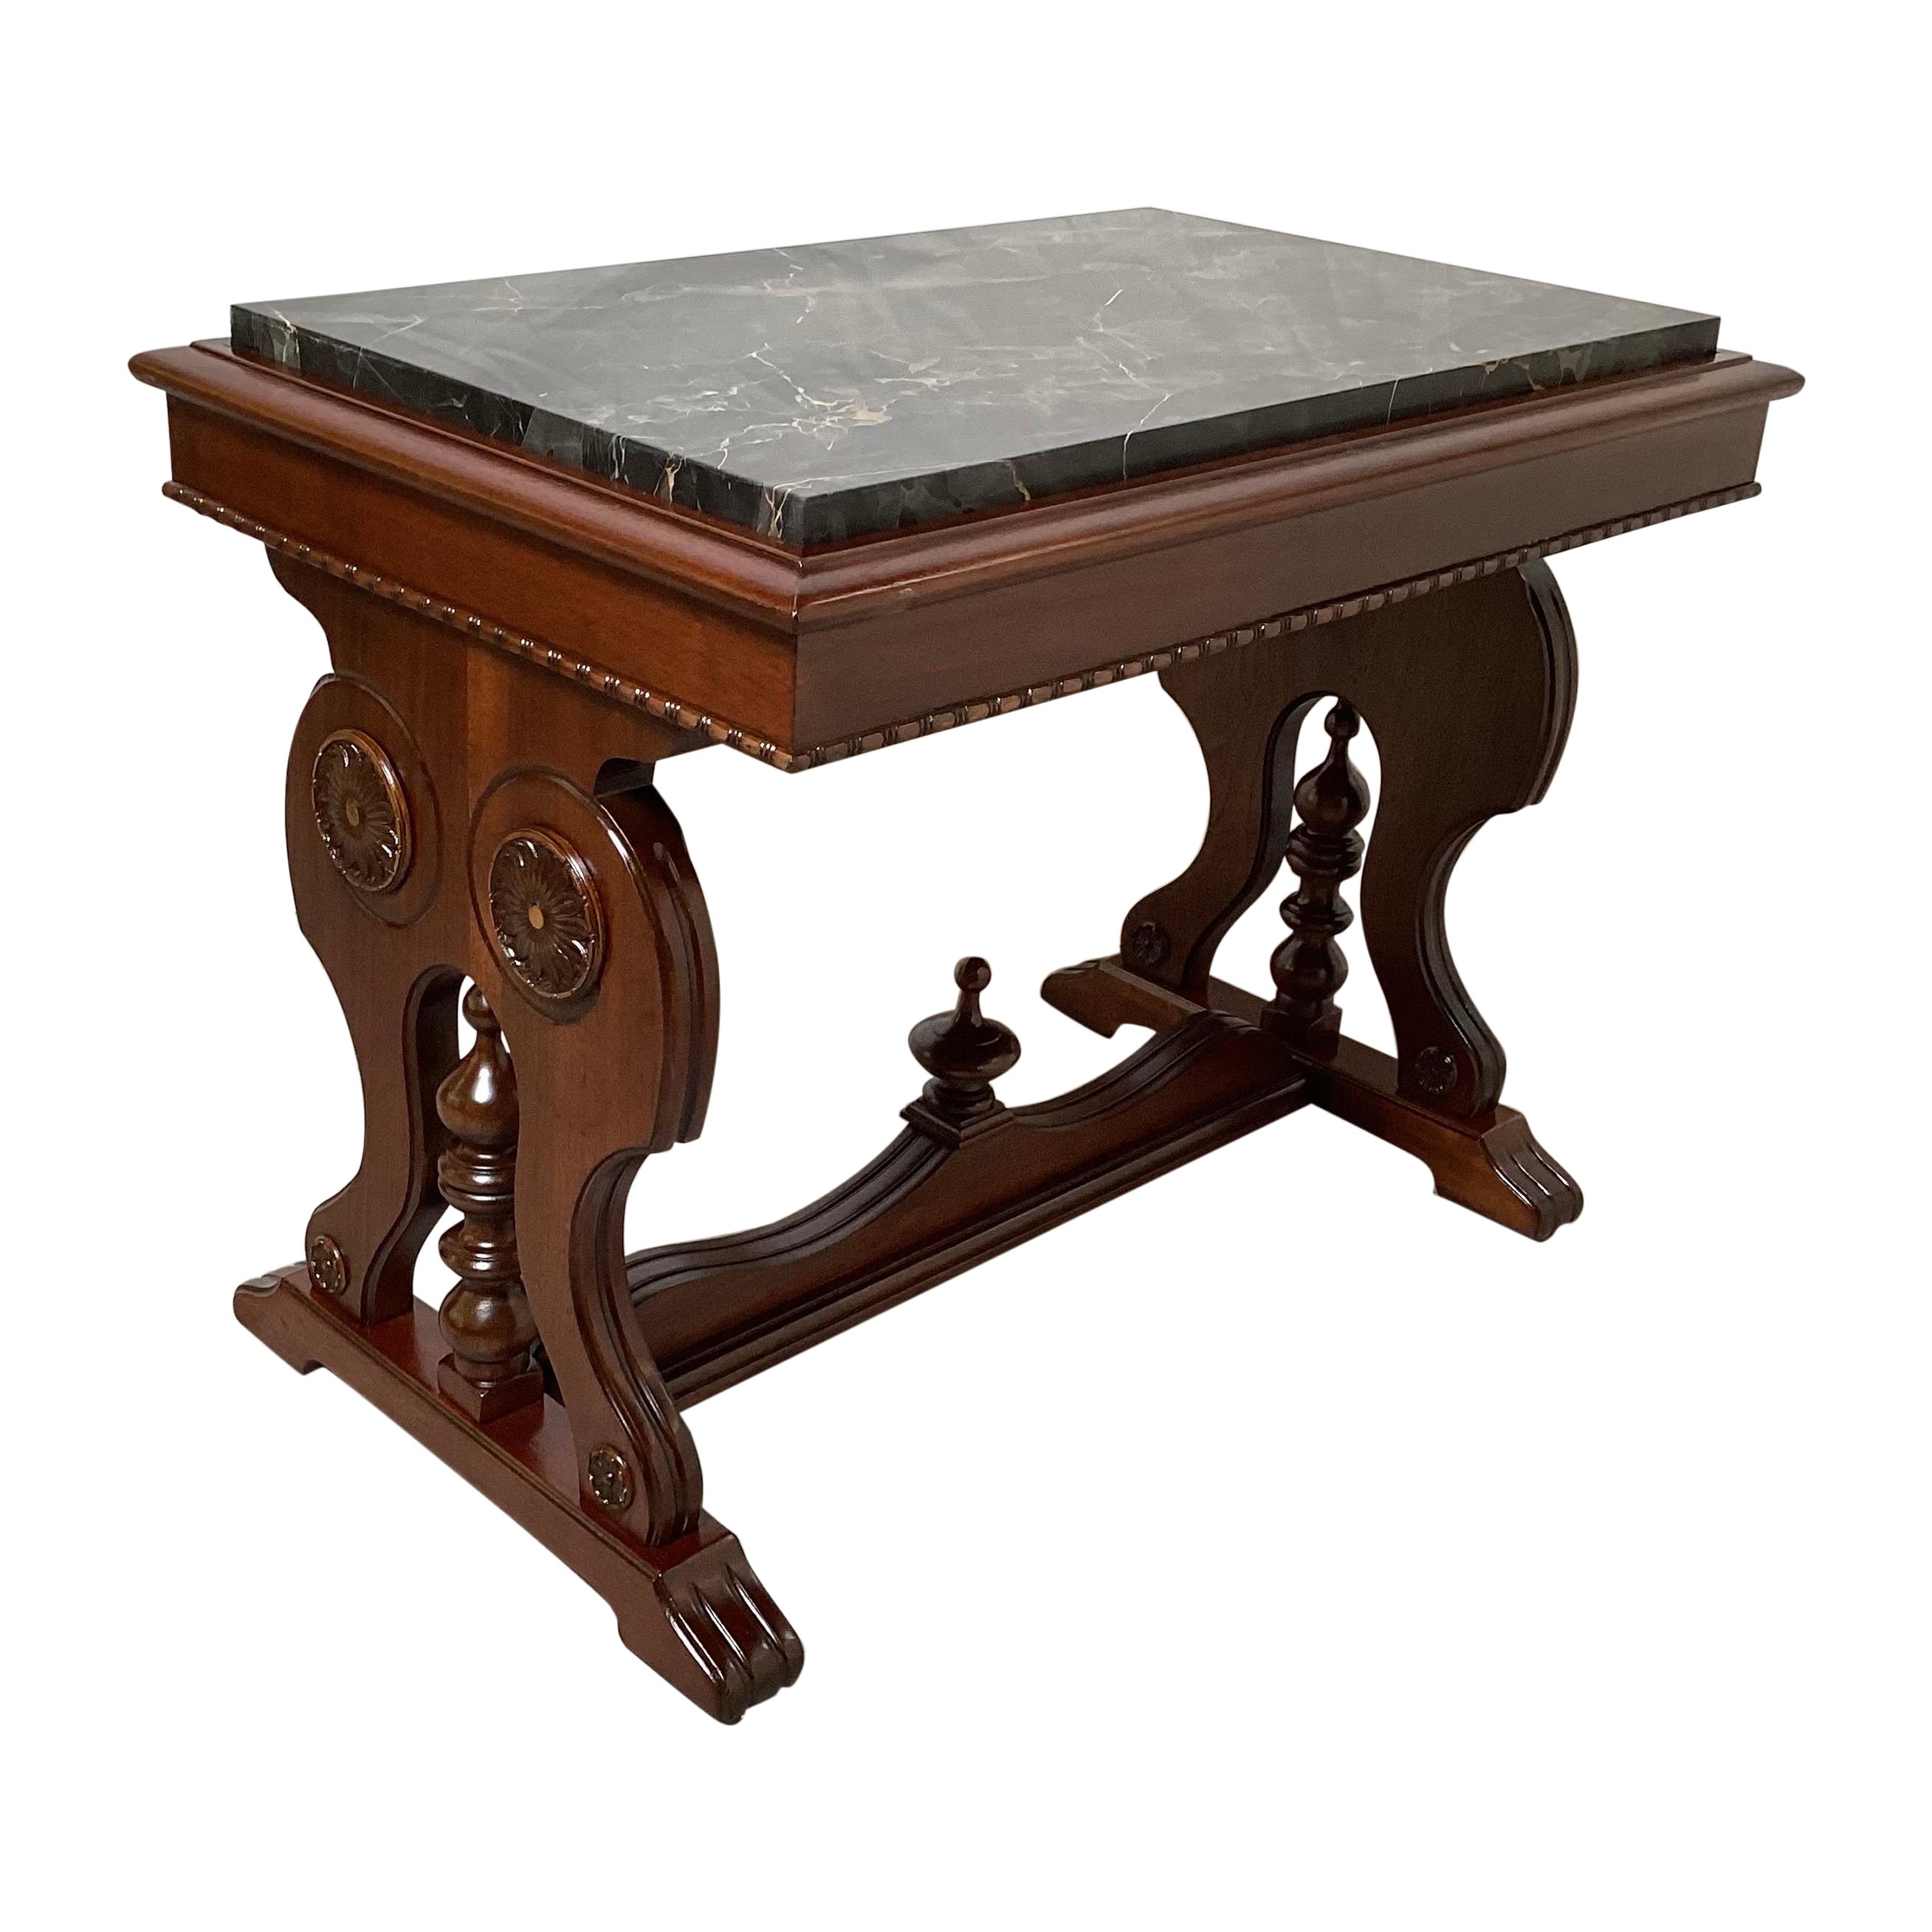 19th Century Carved Walnut and Marble Accent Table